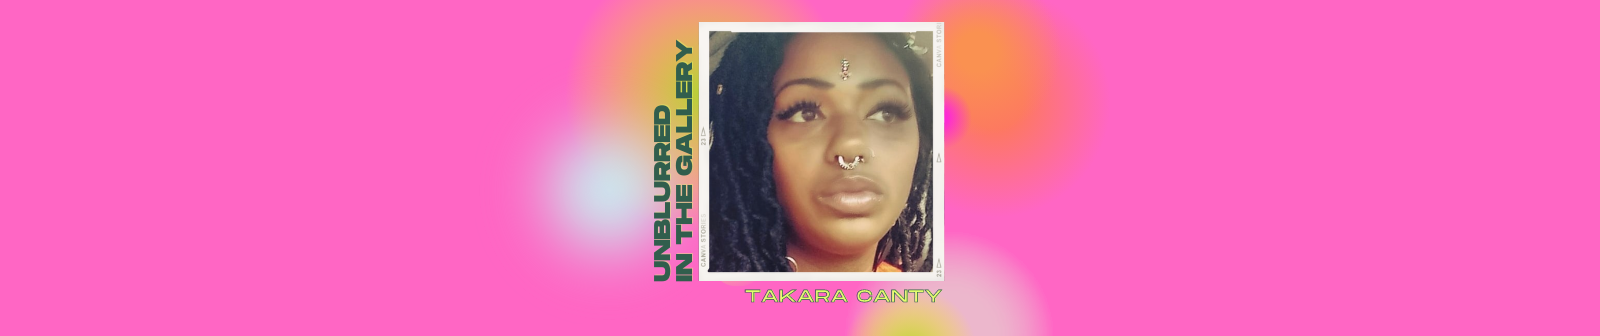 Unblurred in the Gallery with Takara Canty